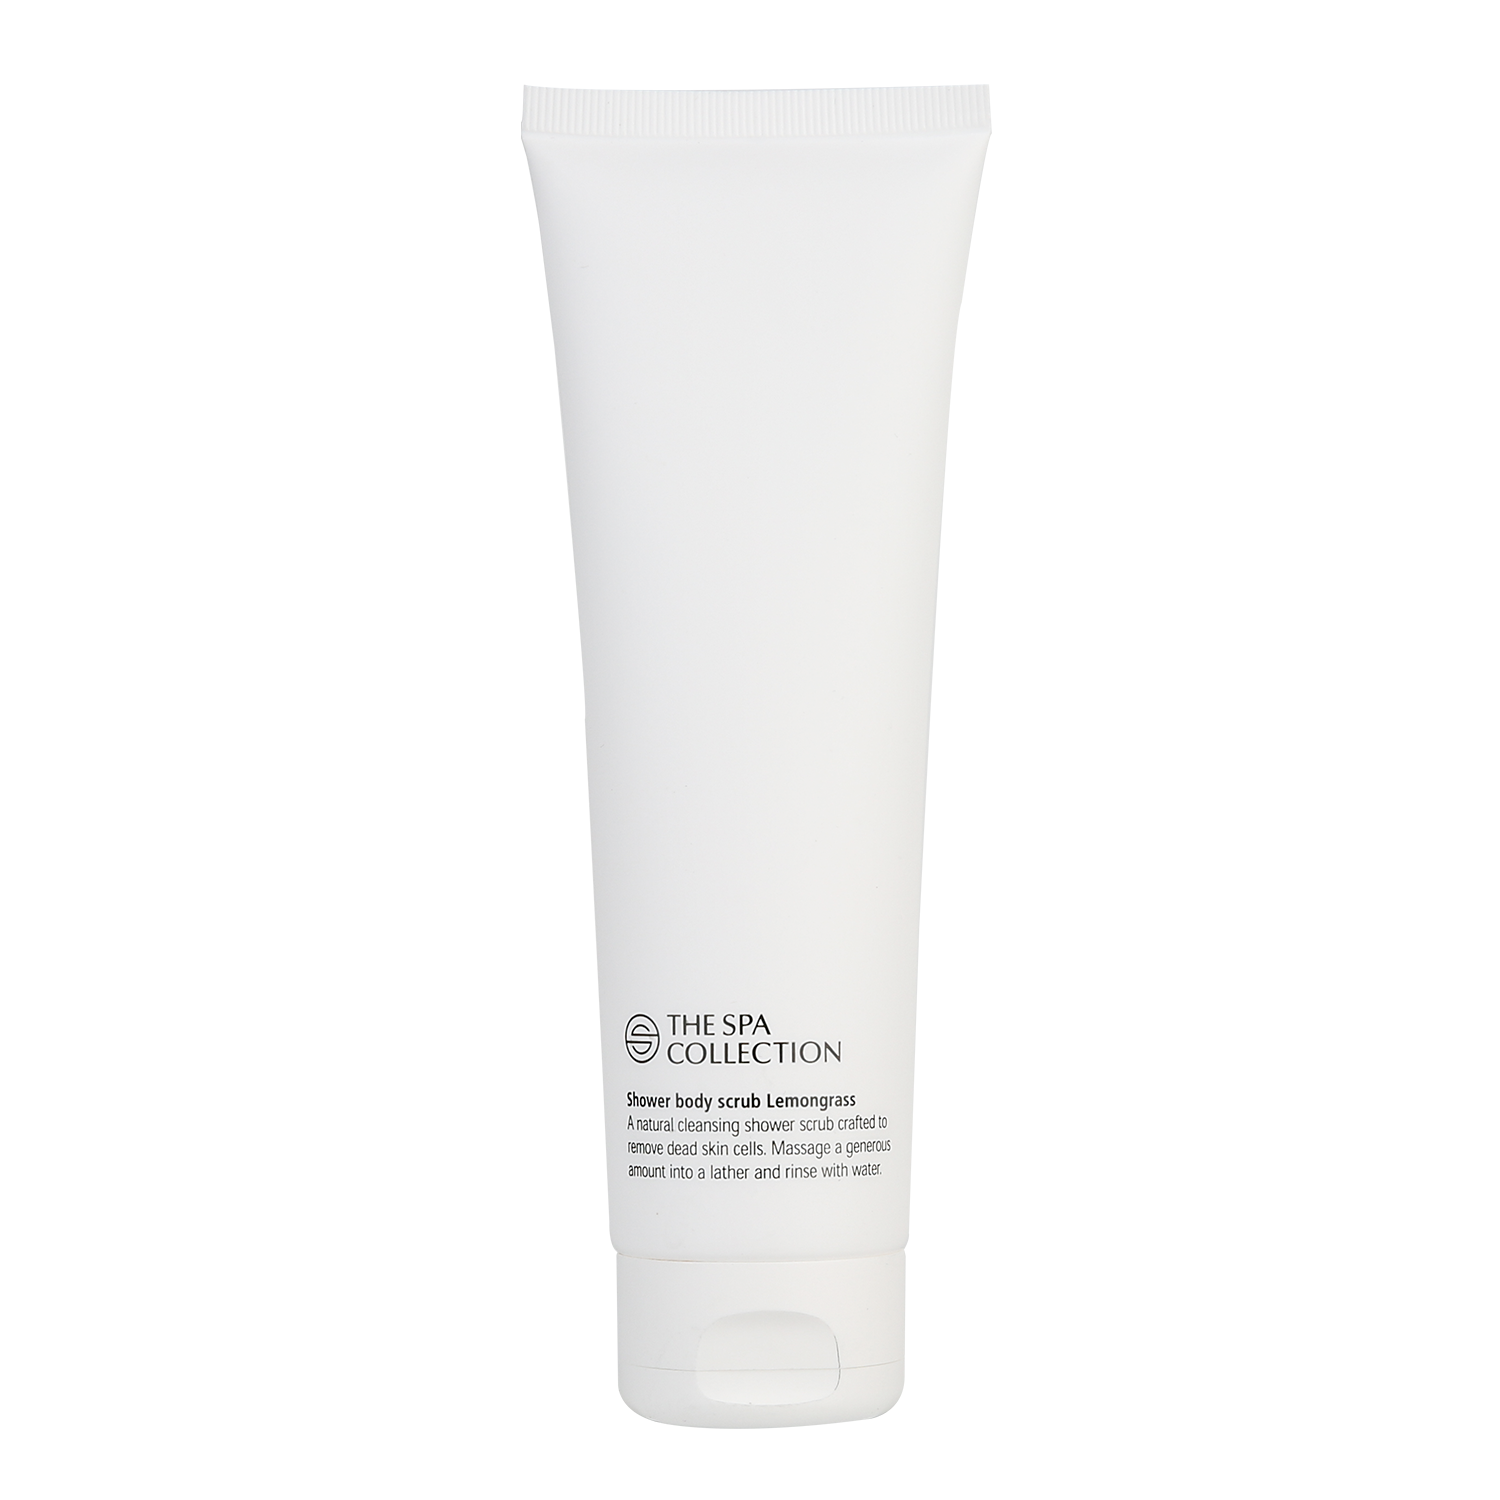 White tube luxurious Body scrub with lemongrass fragrance by The Spa Collection with 150ml tube.